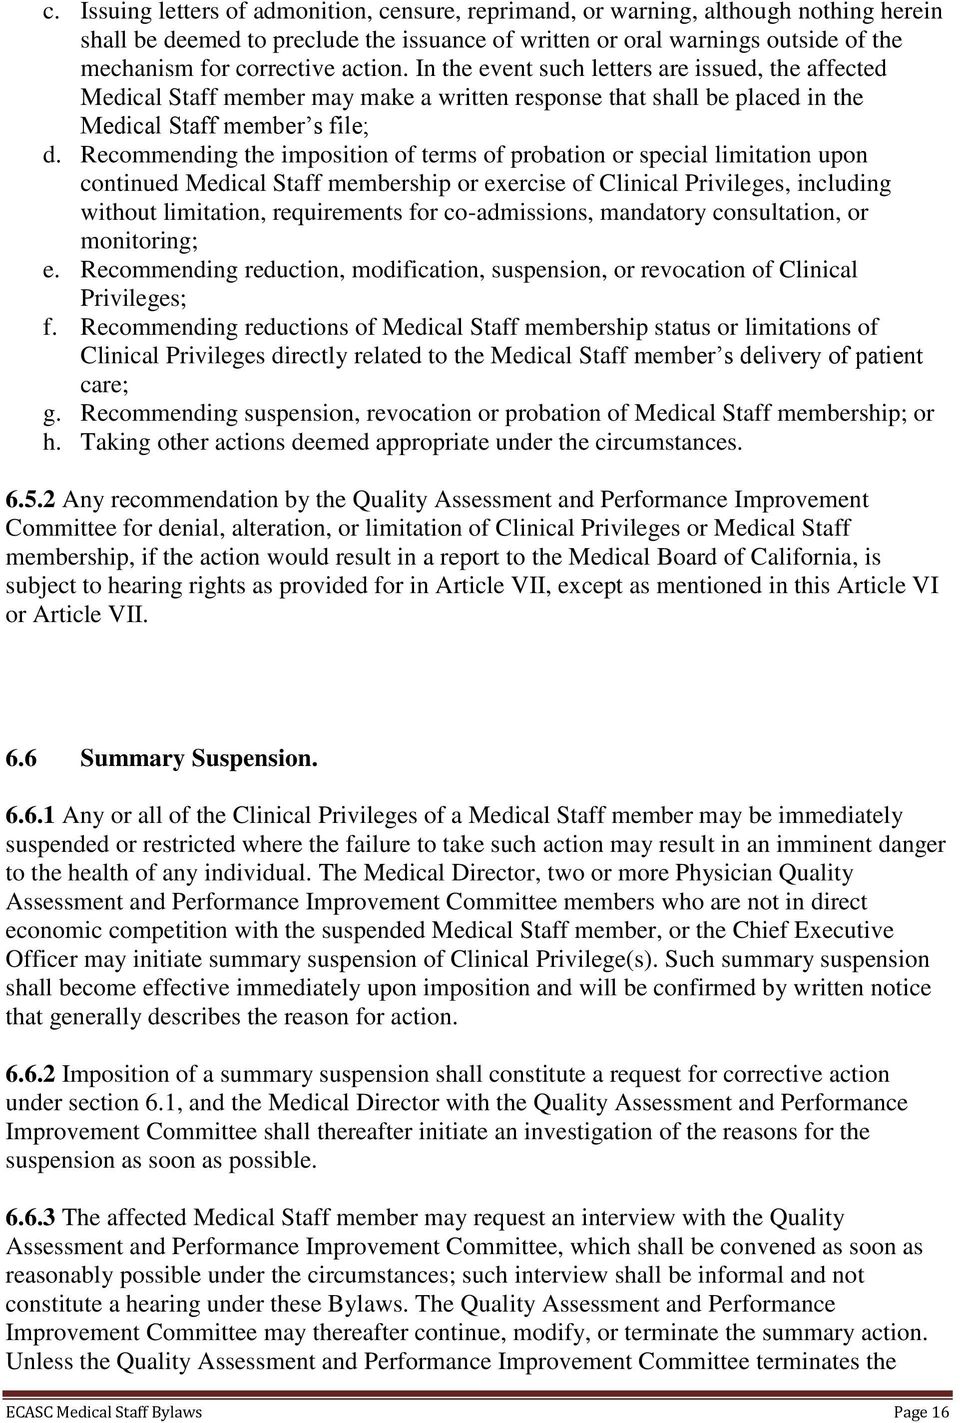 Recommending the imposition of terms of probation or special limitation upon continued Medical Staff membership or exercise of Clinical Privileges, including without limitation, requirements for